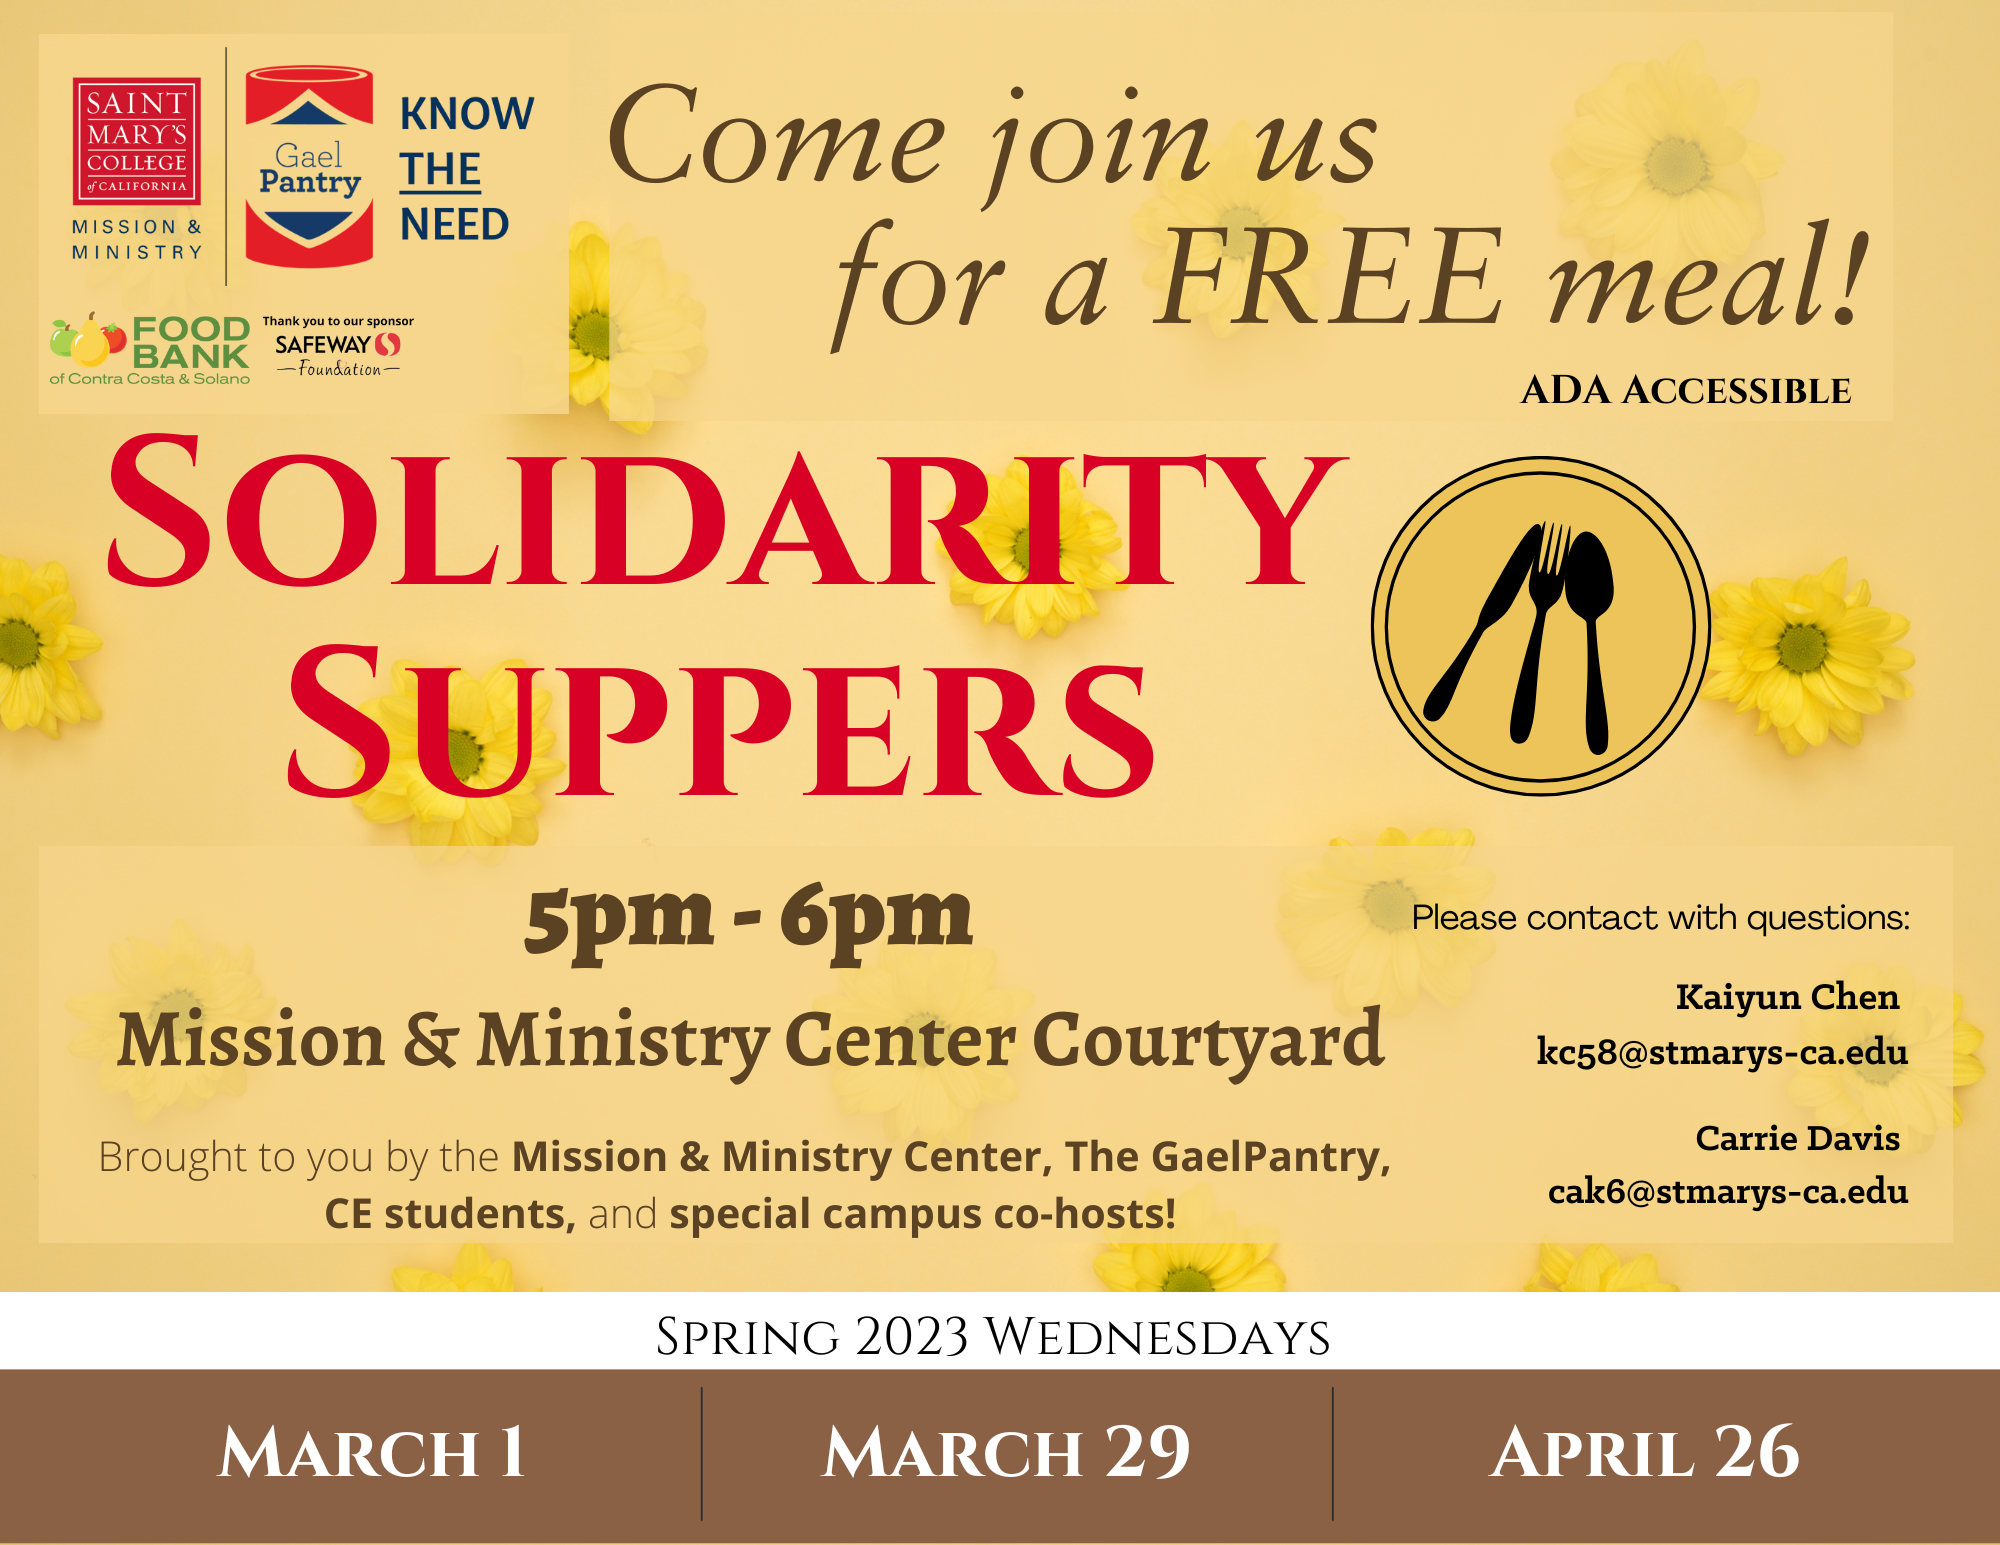 Flyer with a yellow background, images of daisies, a plate and utensils,and the GaelPantry logo with the hours and dates of Solidarity Suppers for Spring 2023.